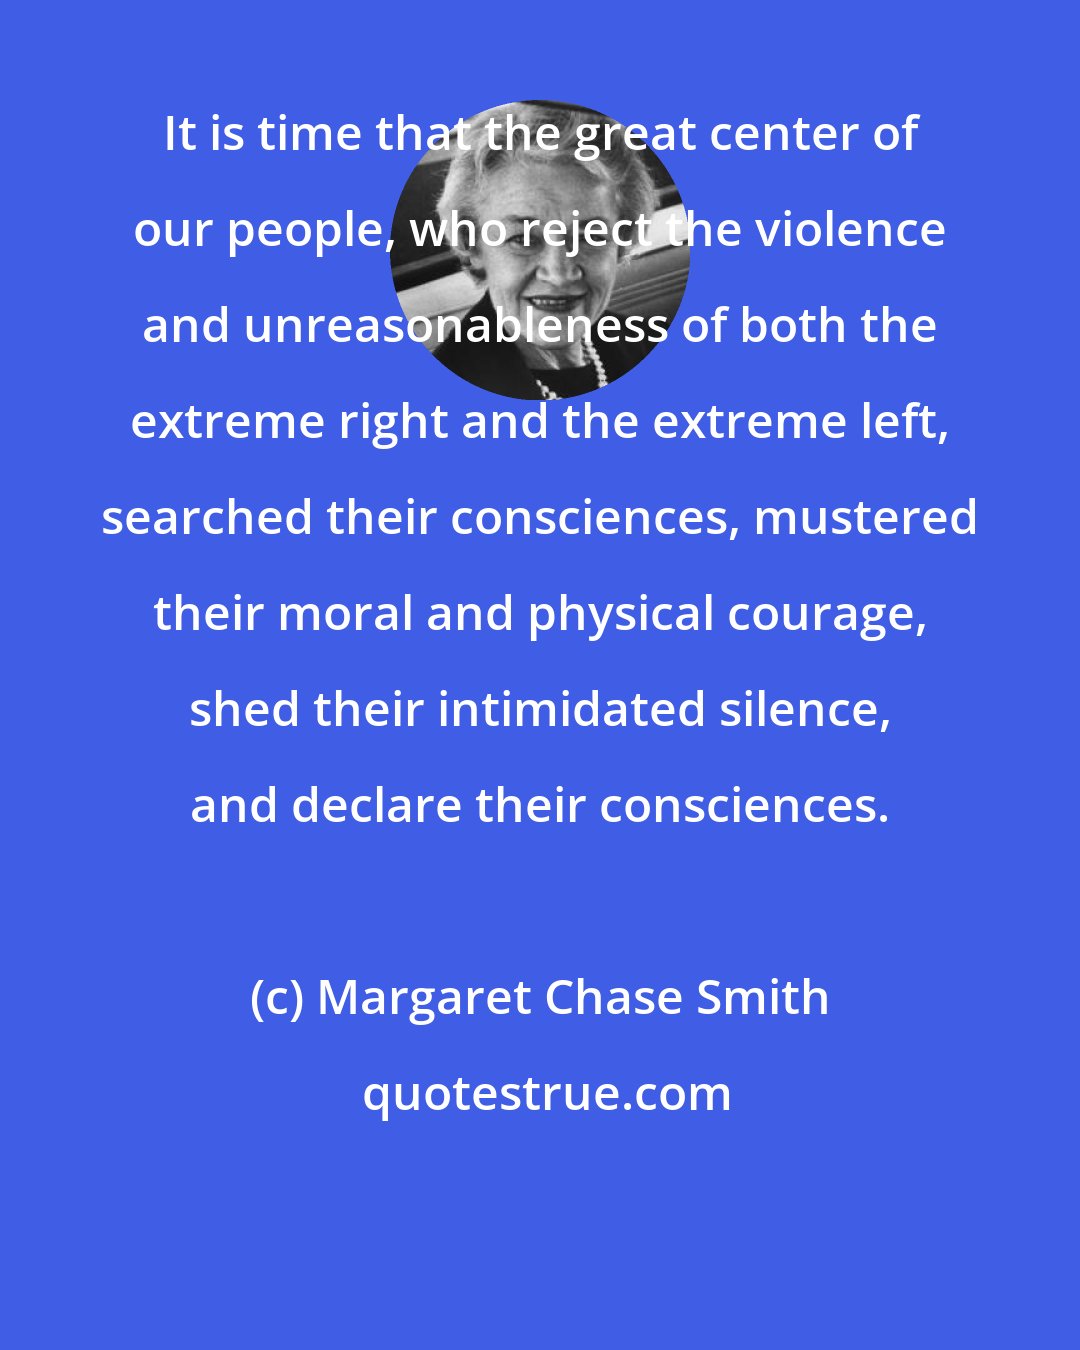 Margaret Chase Smith: It is time that the great center of our people, who reject the violence and unreasonableness of both the extreme right and the extreme left, searched their consciences, mustered their moral and physical courage, shed their intimidated silence, and declare their consciences.